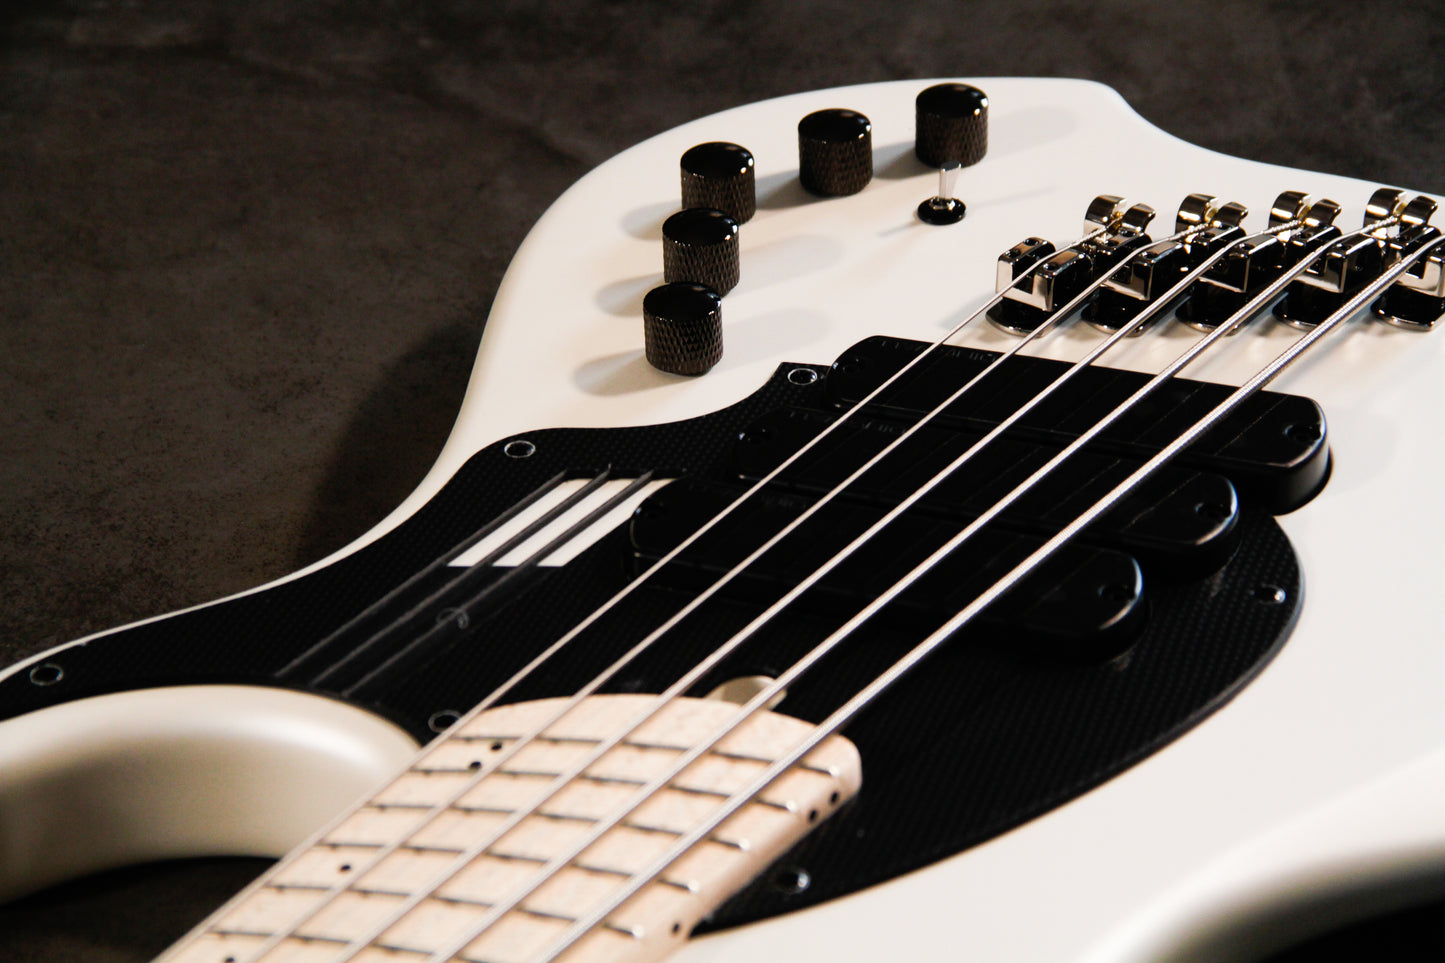 DINGWALL GUITARS NG3 NOLLY SIGNATURE 5 STRING 'Ducati White Pearl" (2 pieces - 2 3 weeks)